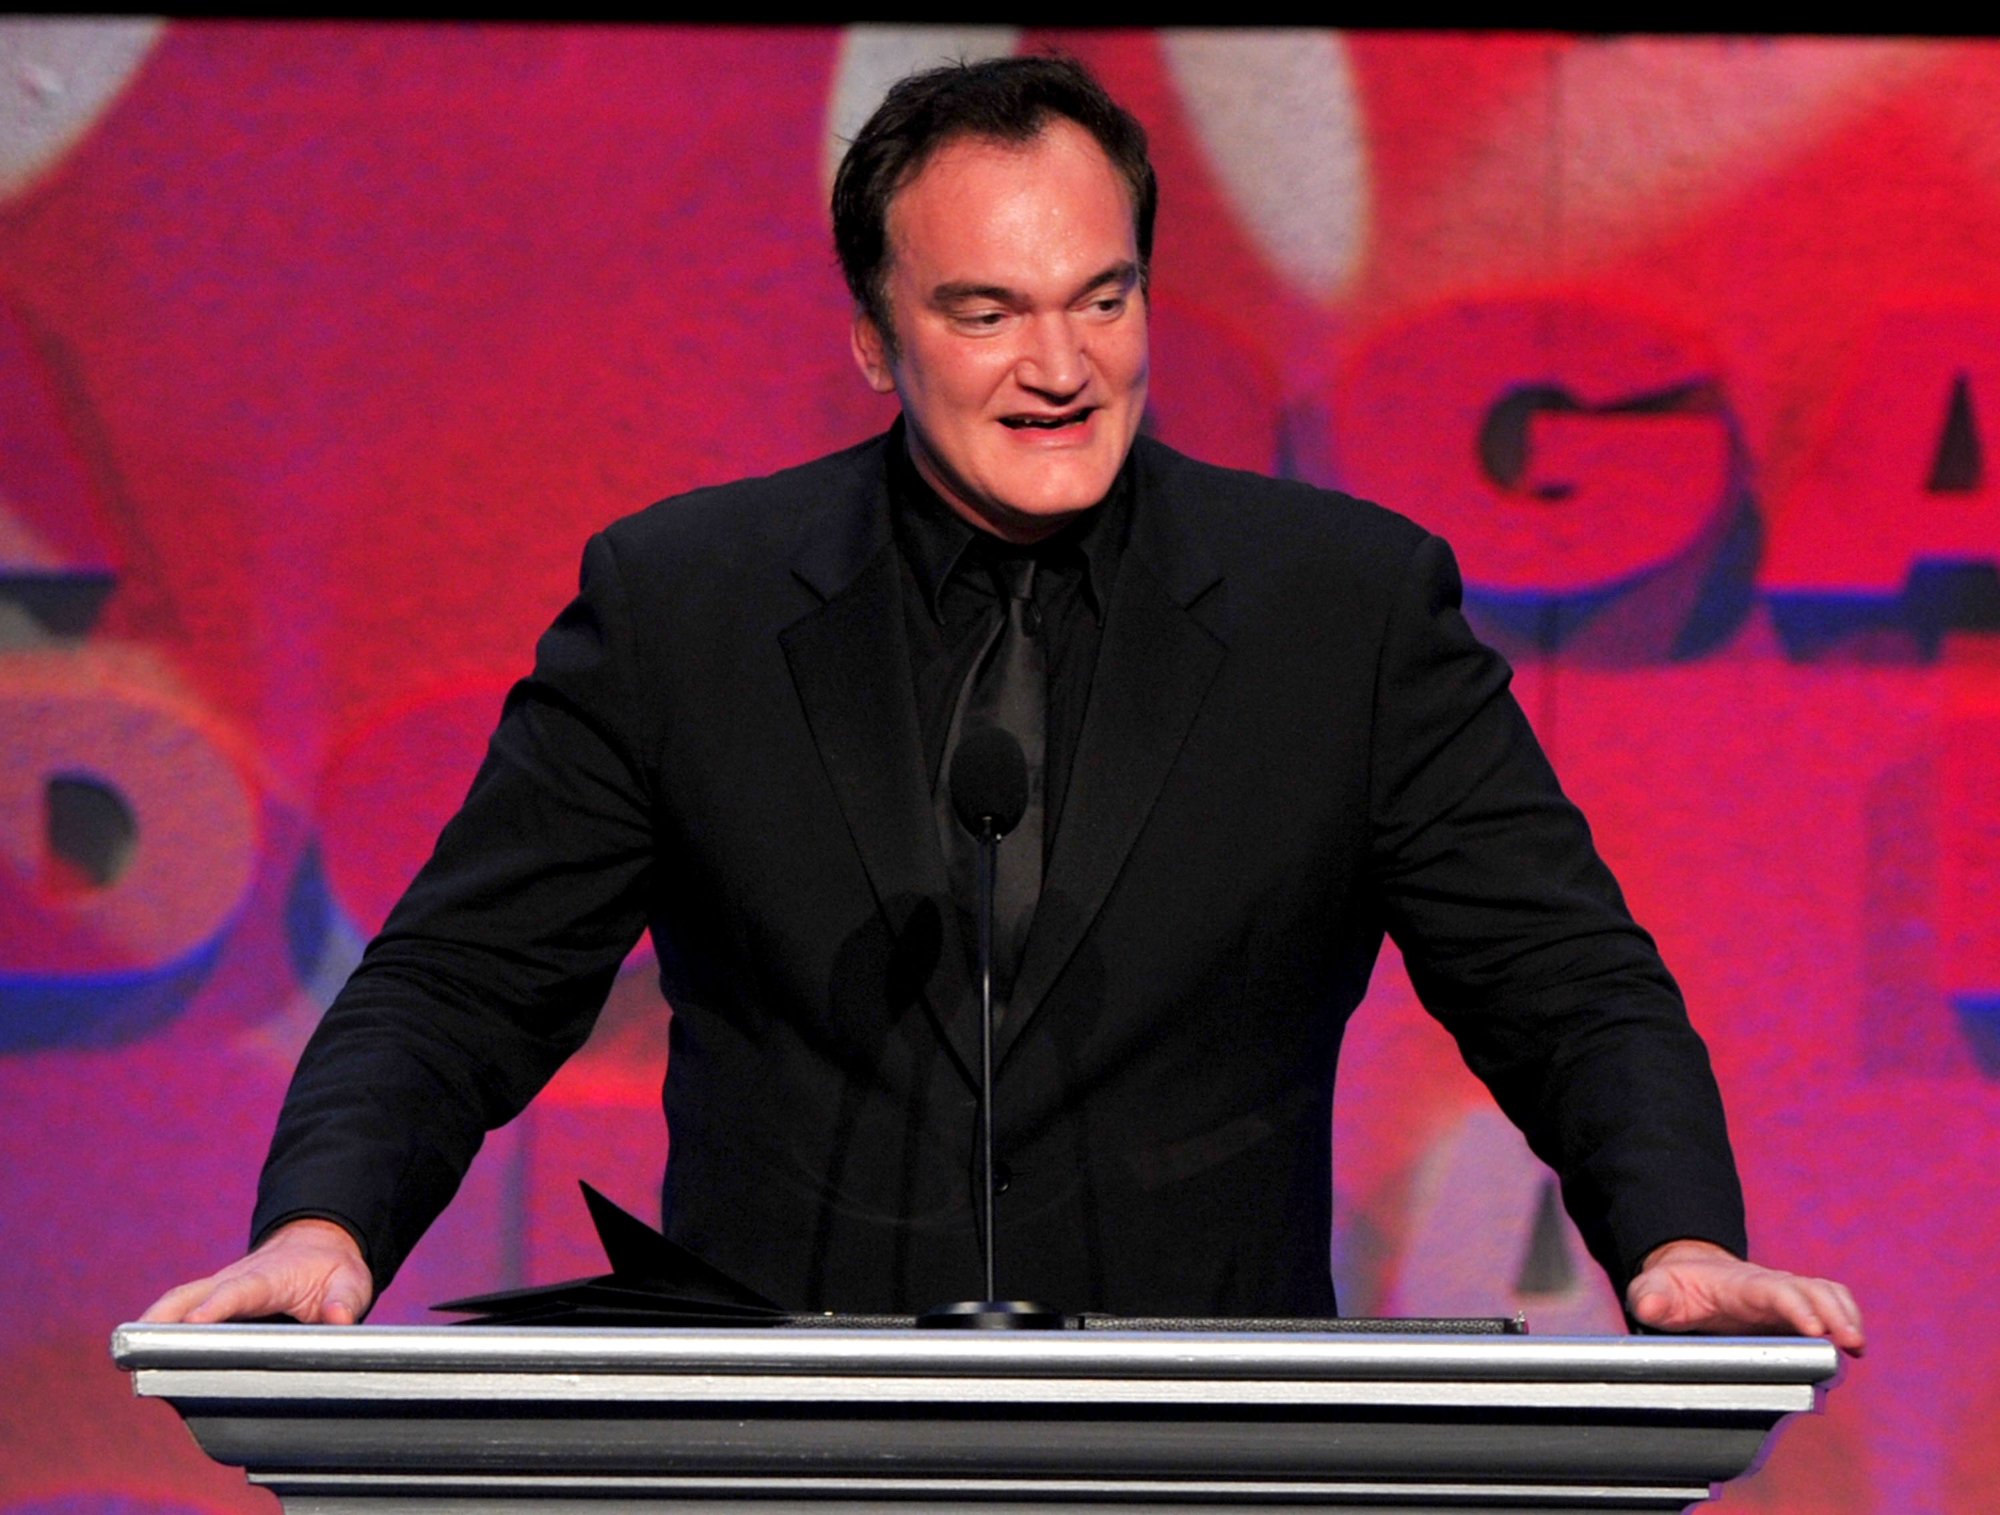 'Inglourious Basterds' filmmaker Quentin Tarantino smiling in a black suit behind a podium in front of a red background